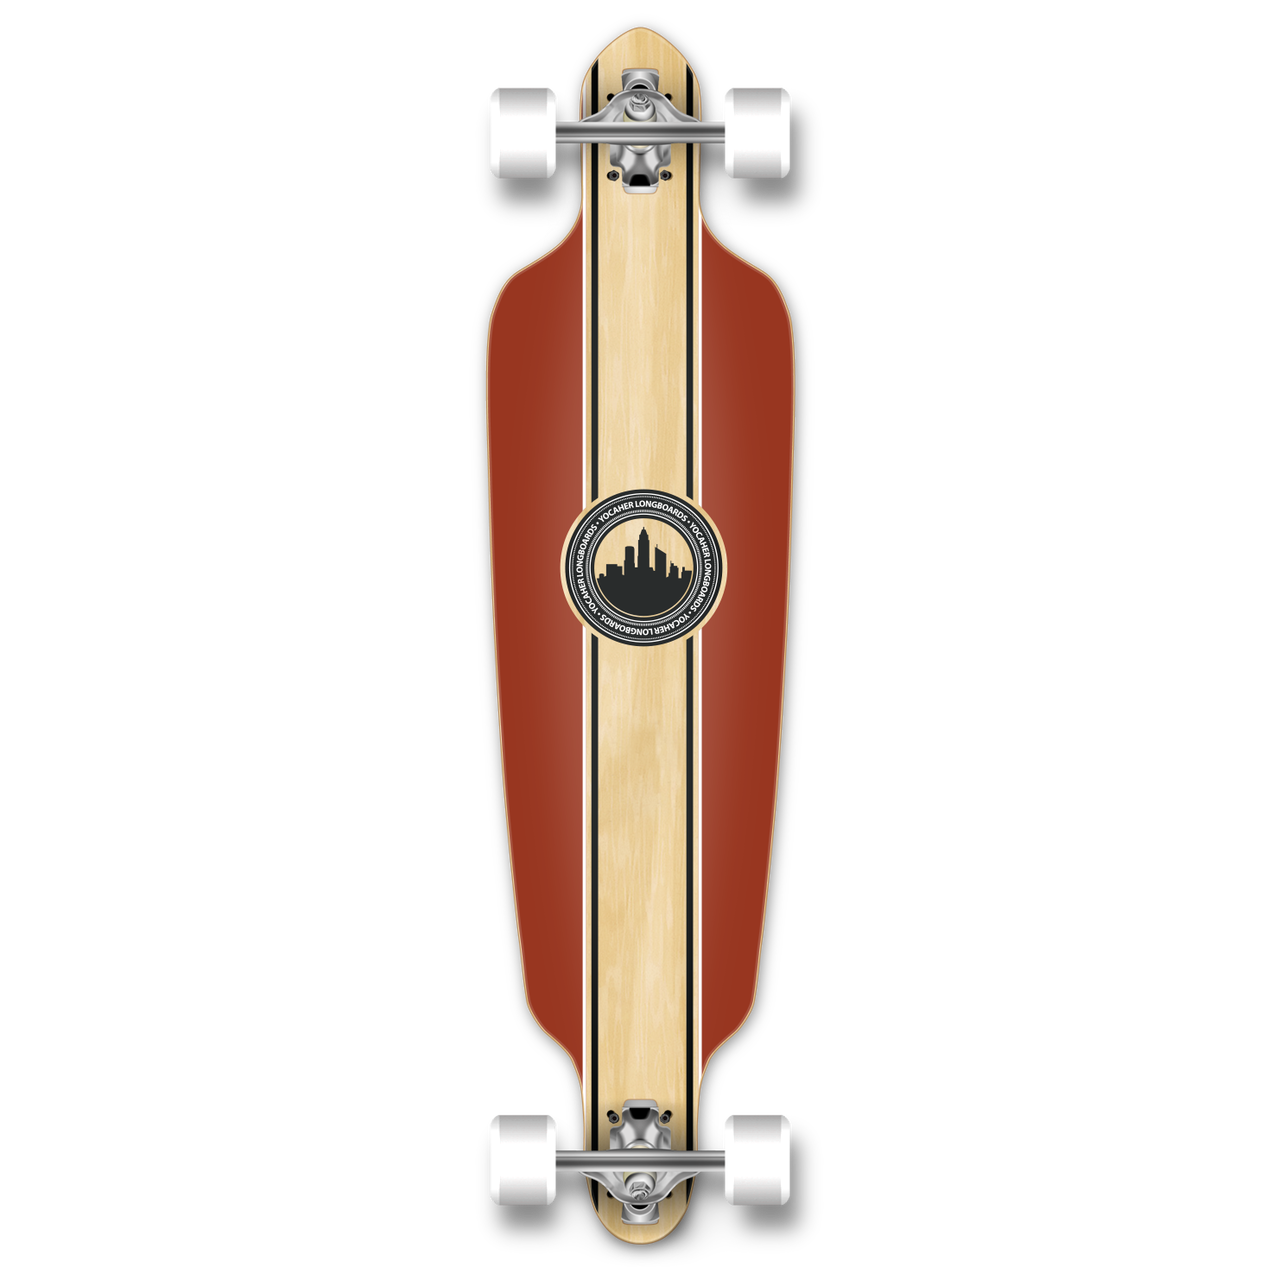 Yocaher Drop Through Longboard Complete - Crest Burgundy